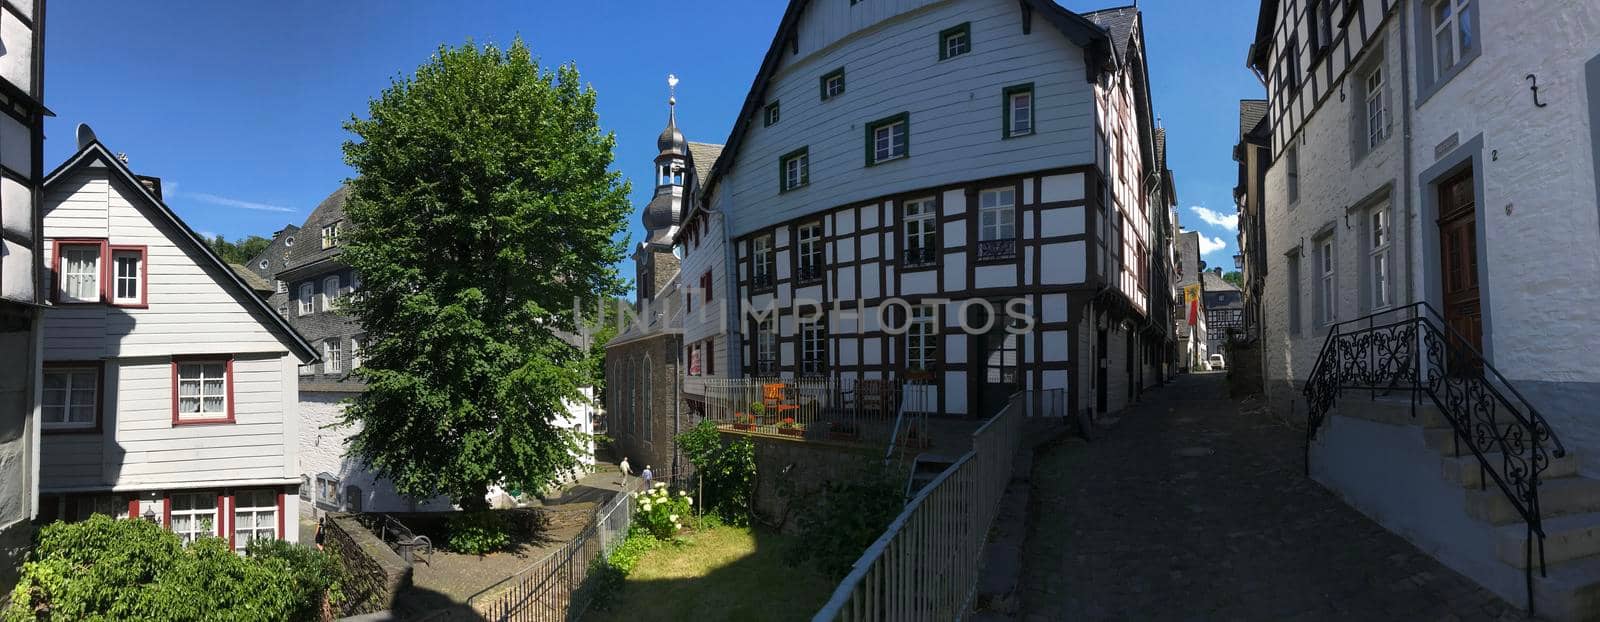 Panorama from Timberframe houses in Monschau Germany